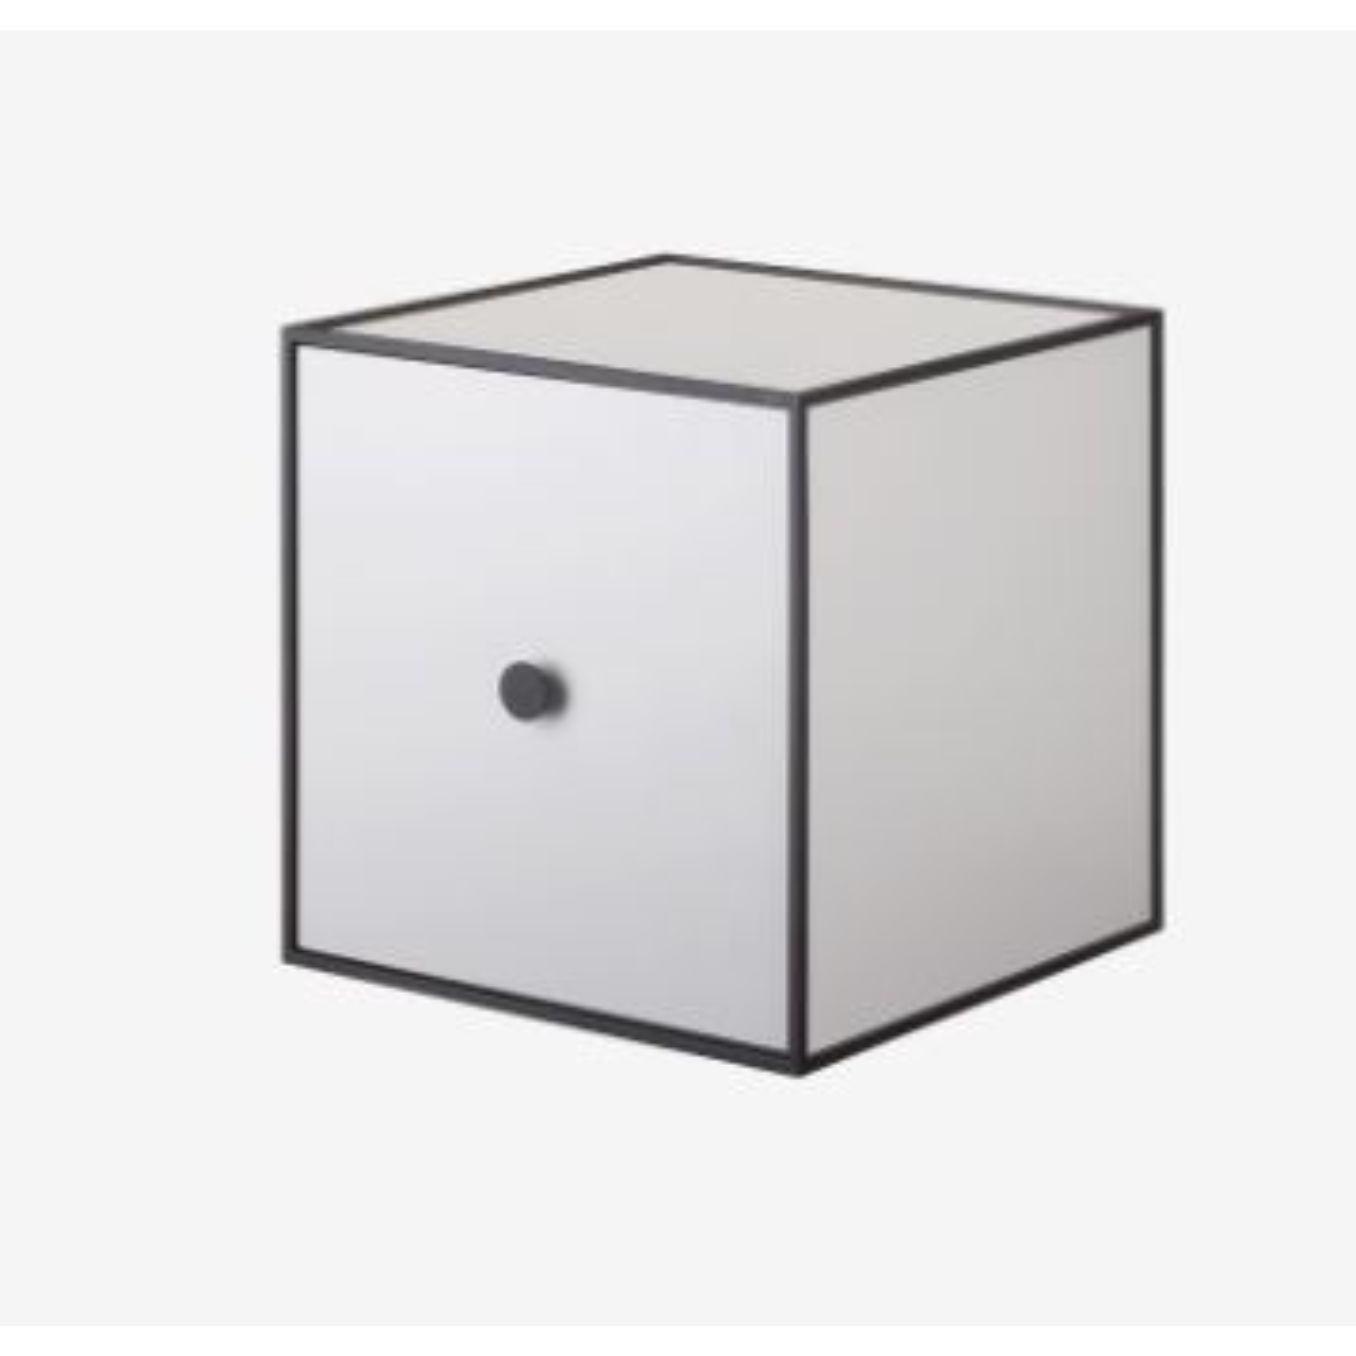 35 light grey frame box with door by Lassen
Dimensions: W 35 x D 35 x H 35 cm 
Materials: Finér, Melamin, Melamin, Melamine, Metal, Veneer
Also available in different colors and dimensions. 

By Lassen is a Danish design brand focused on iconic